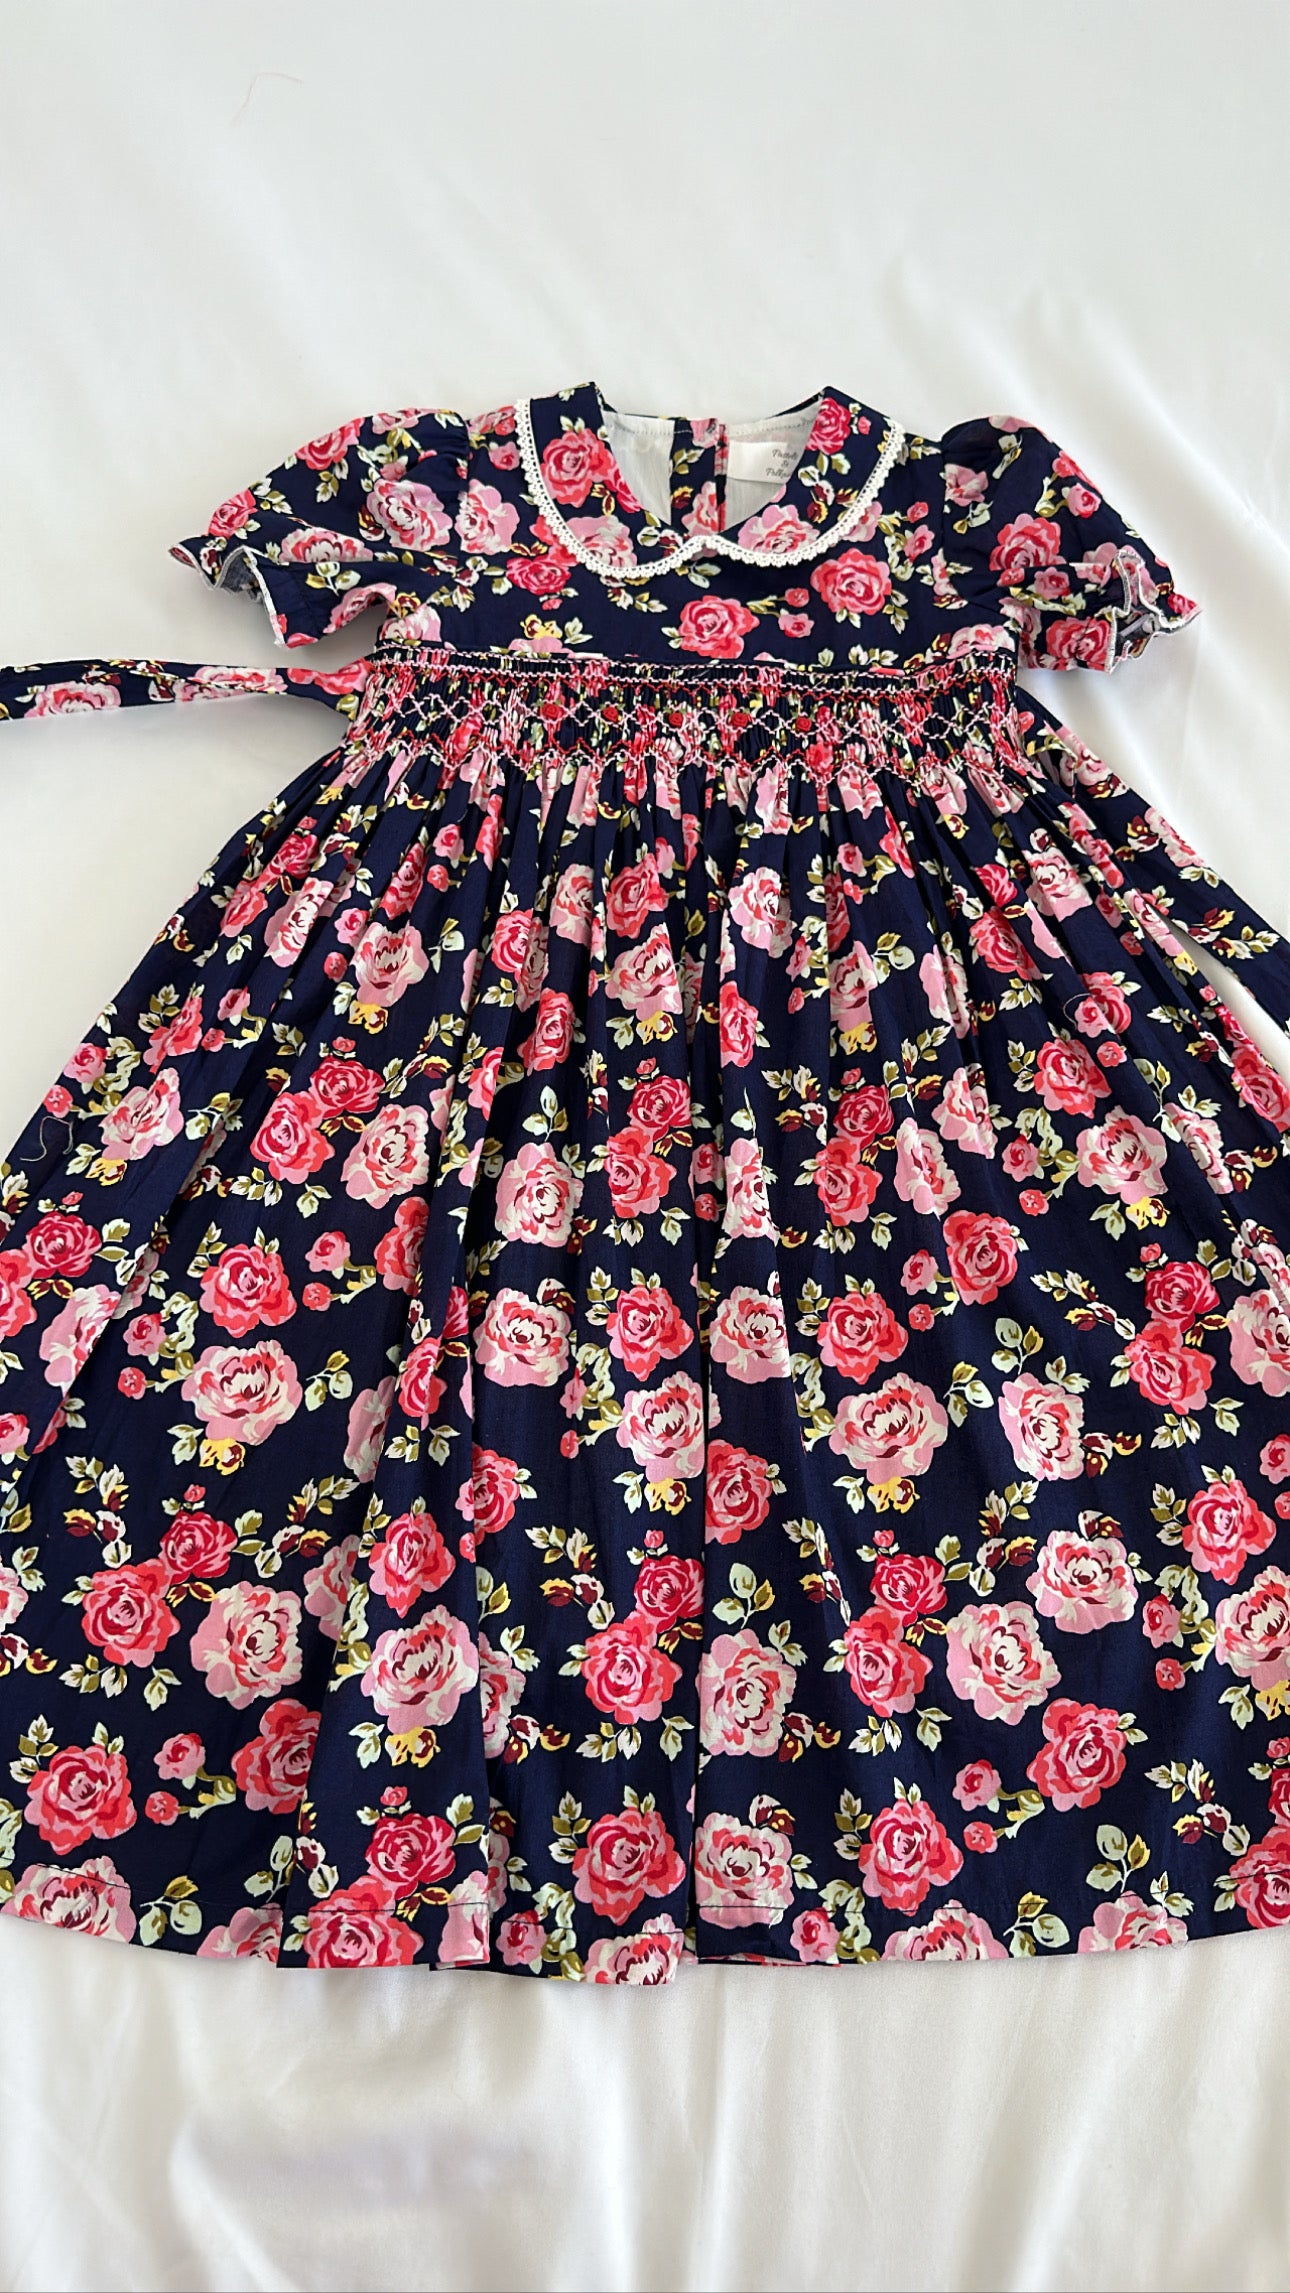 Cute hand smocked floral dress